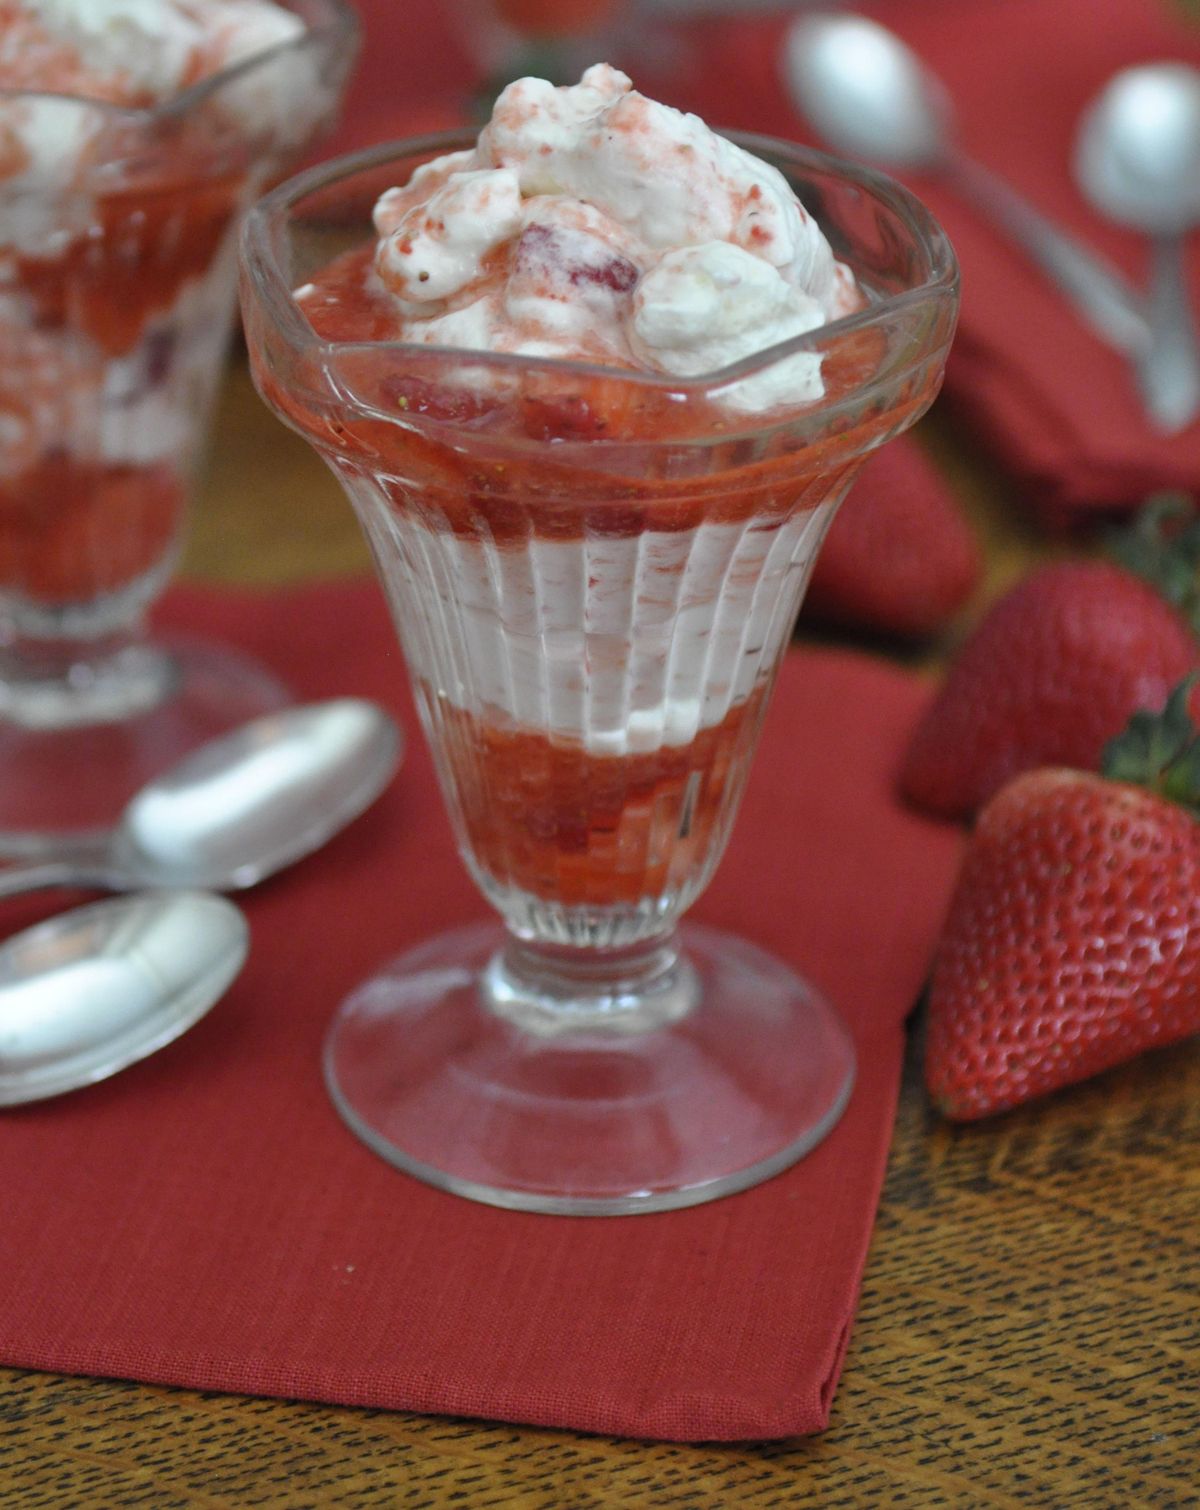 This strawberry fool from Mark Bittman is so easy to make it doesn’t require cooking, just a blender and beaters. (Adriana Janovich / The Spokesman-Review)